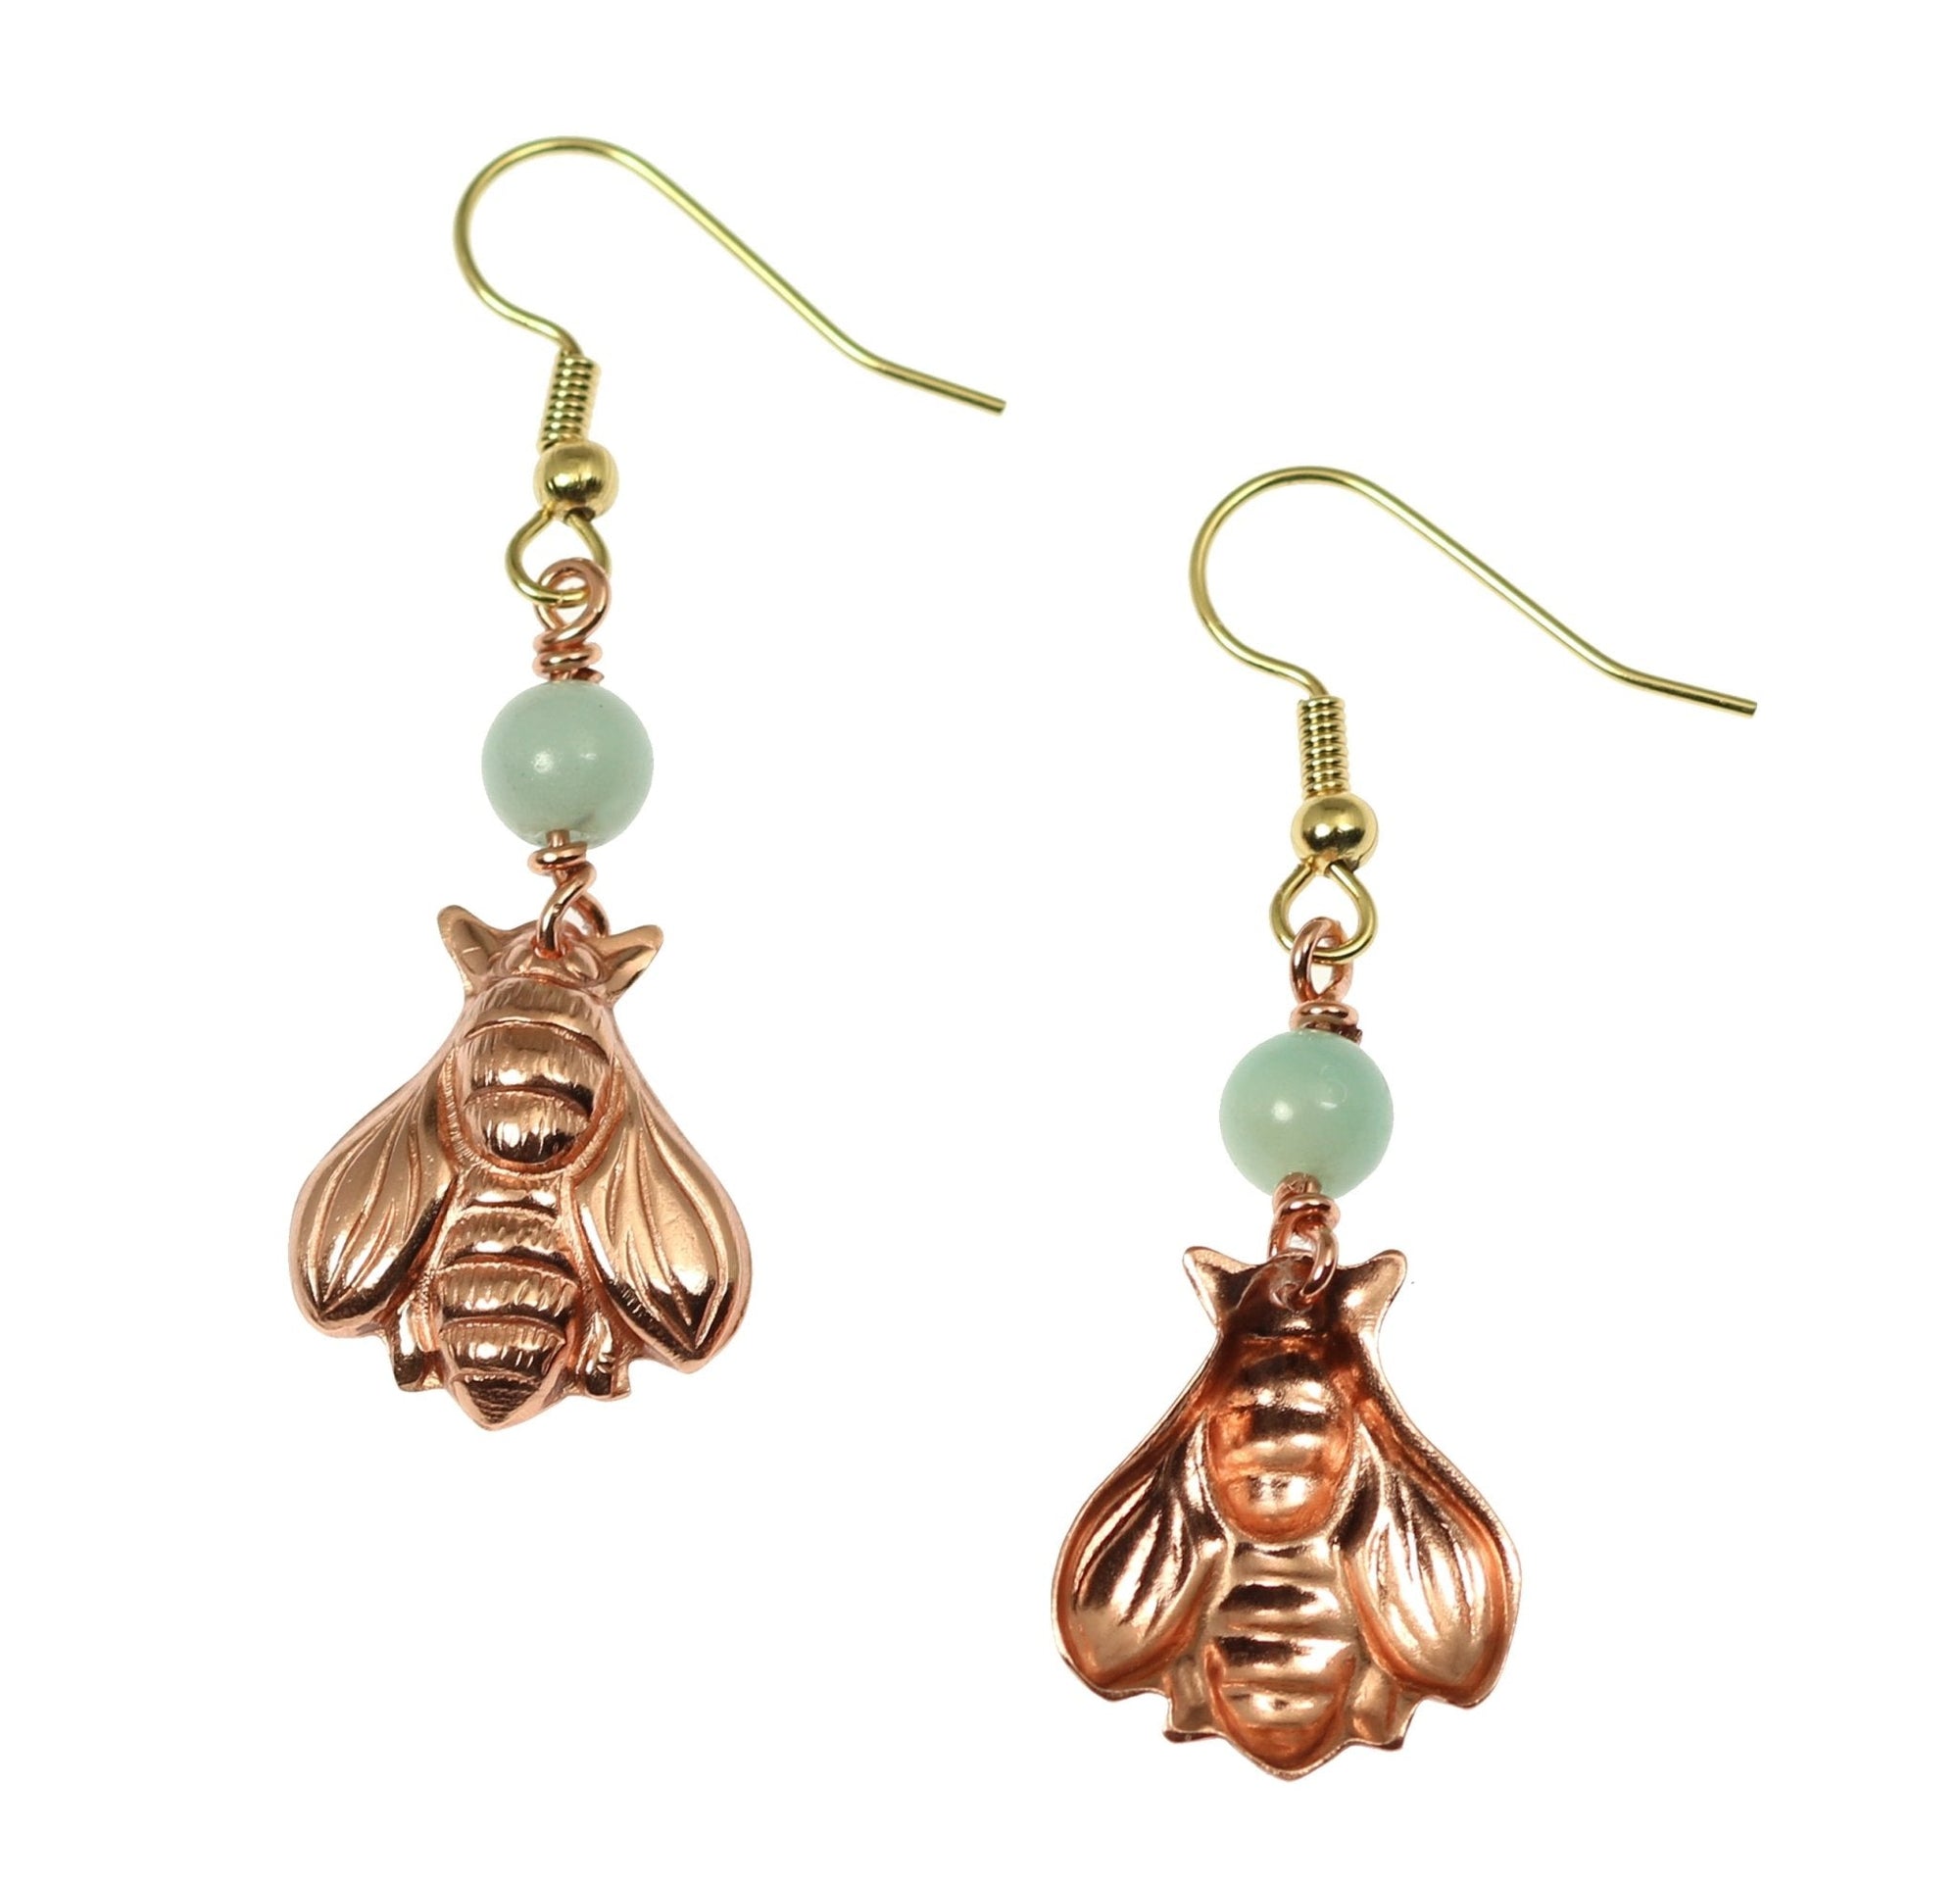 Detail View of Copper Honey Bee Drop Earrings With Amazonite